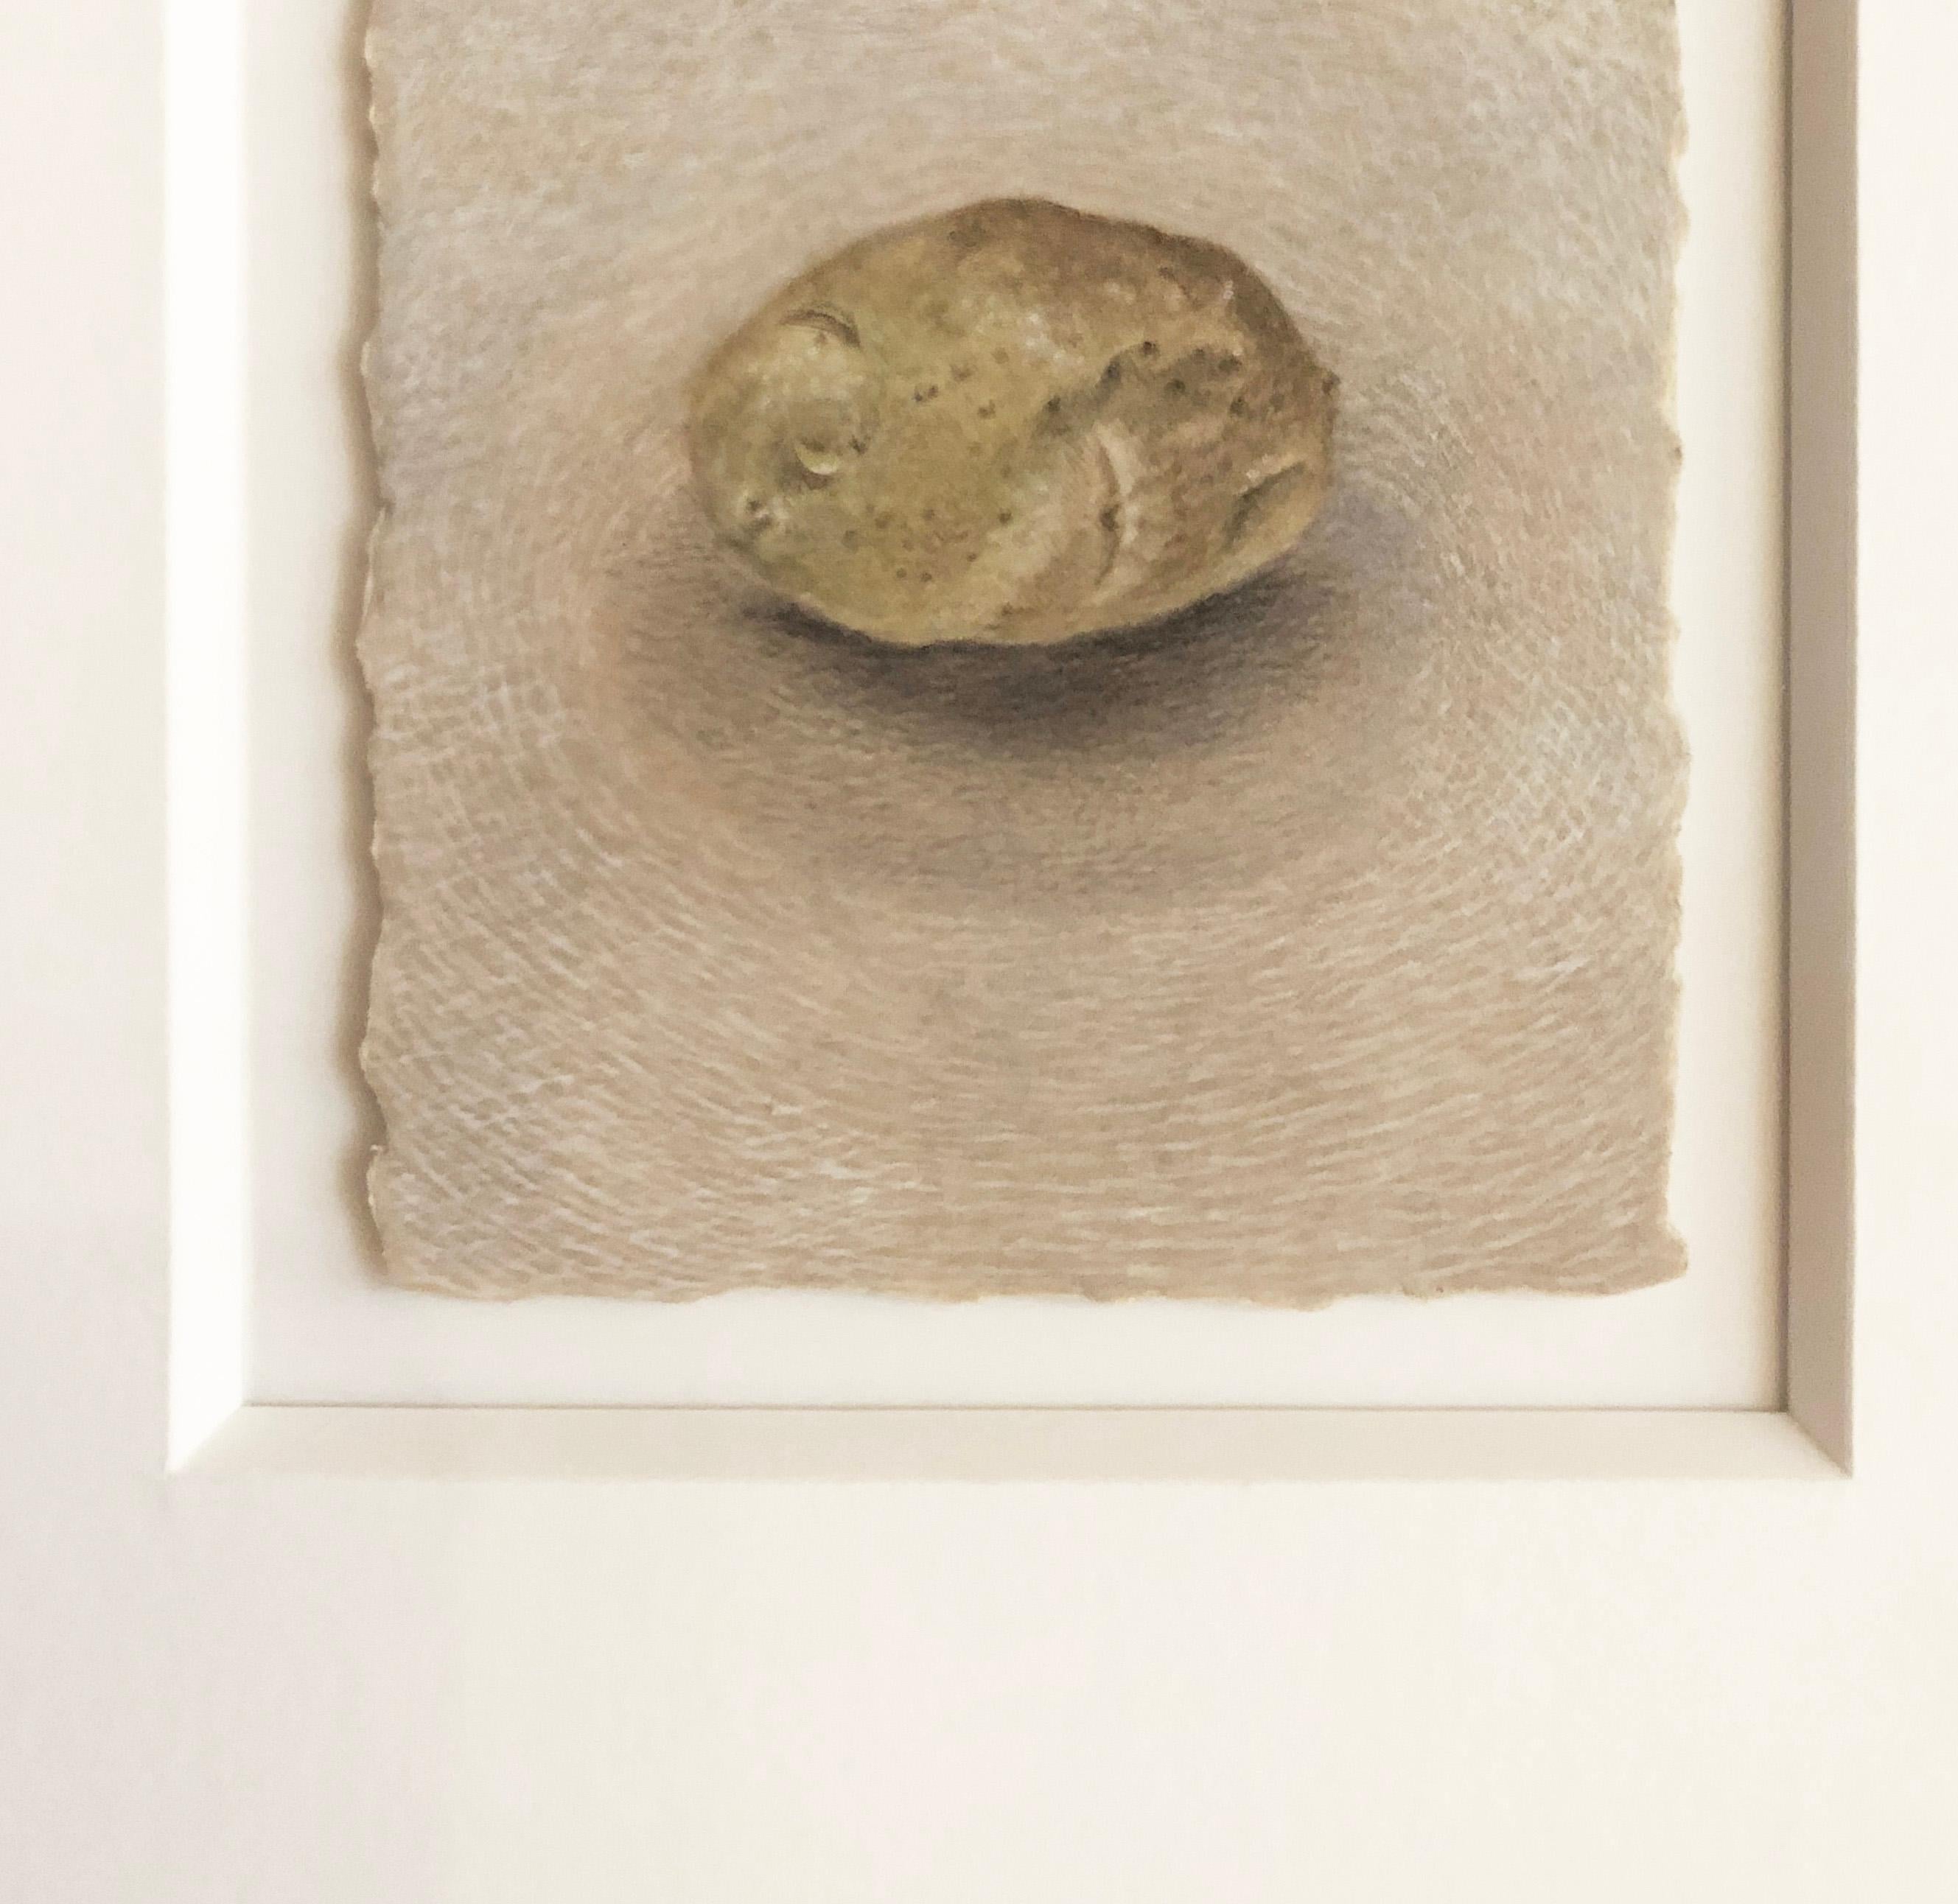 One Potato - Tiny Original Still Life Painting of a Potato on Deckled Edge Paper - Art by Christina Haglid